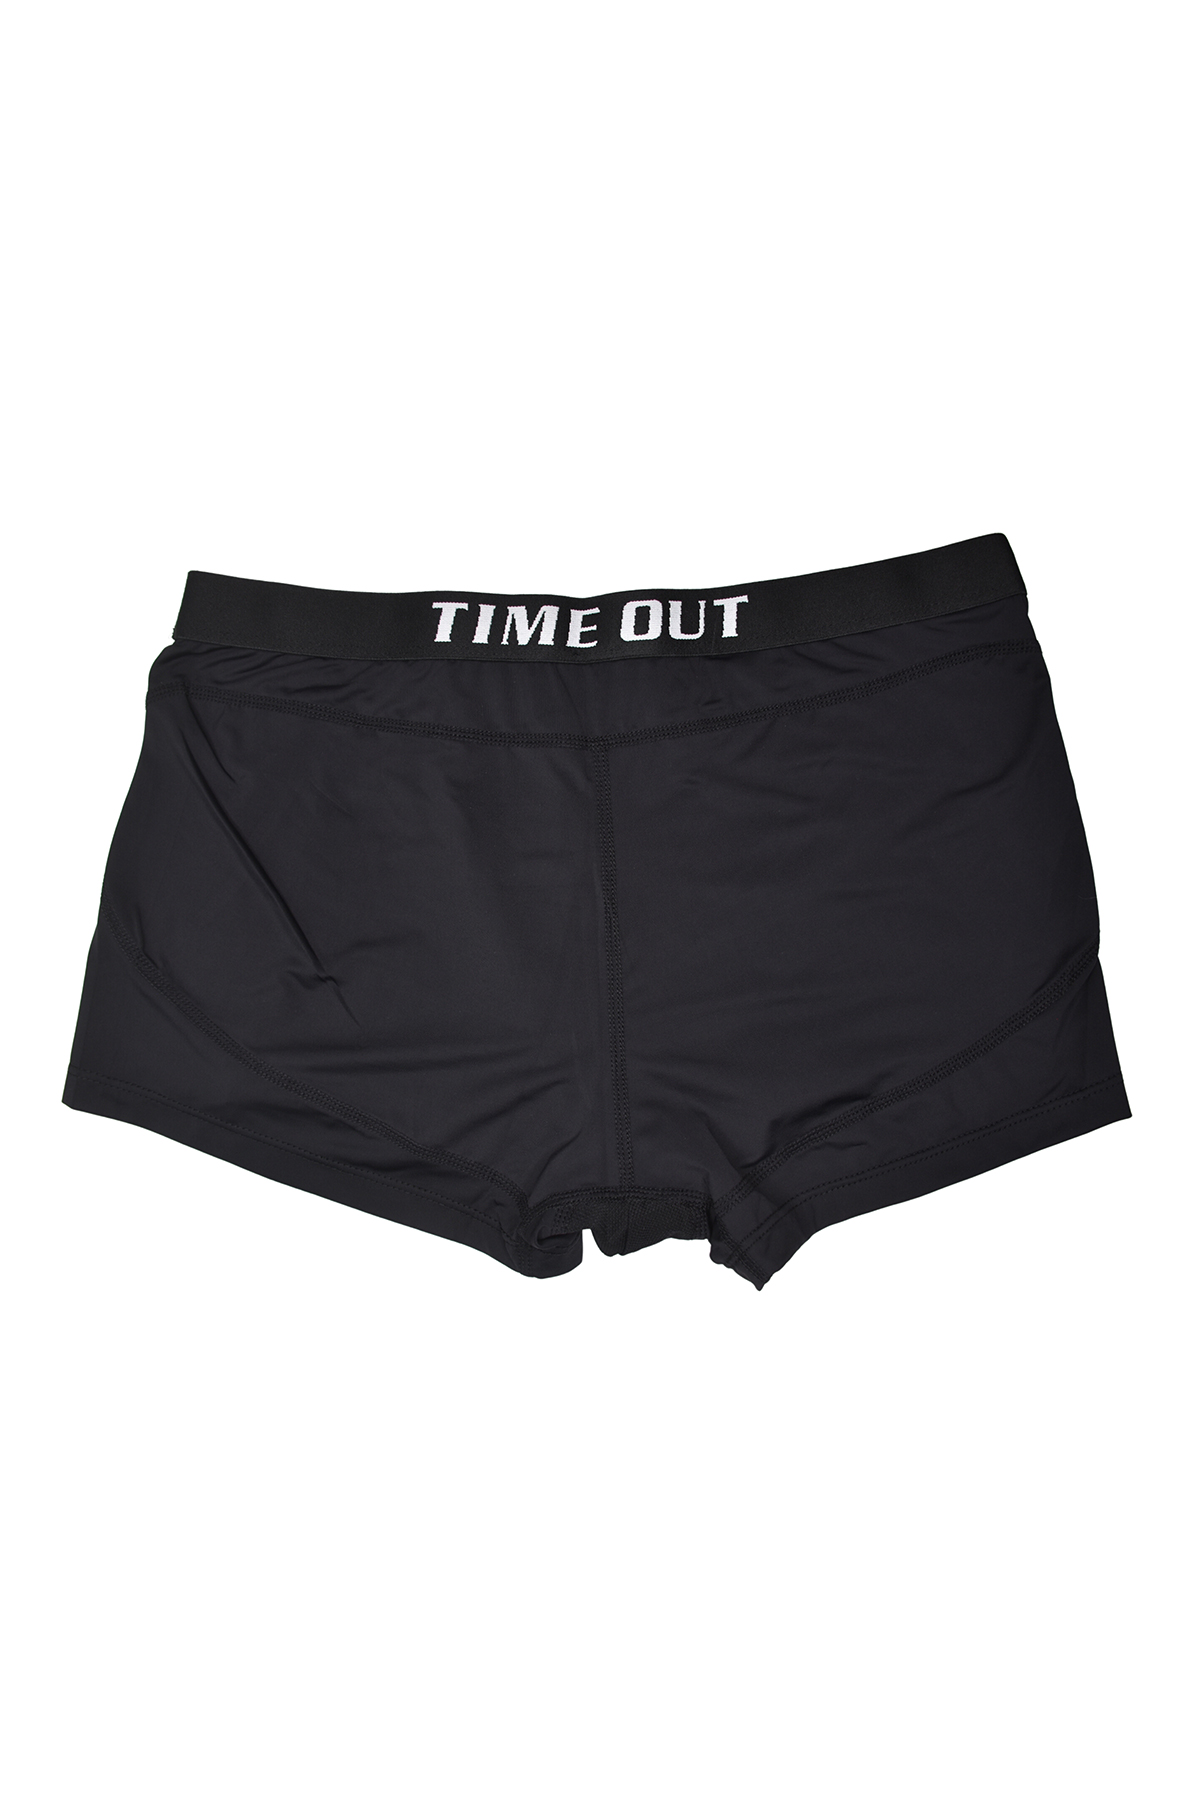 Time-Out-X-Men’s-Activewear-Boxers—Black—Back